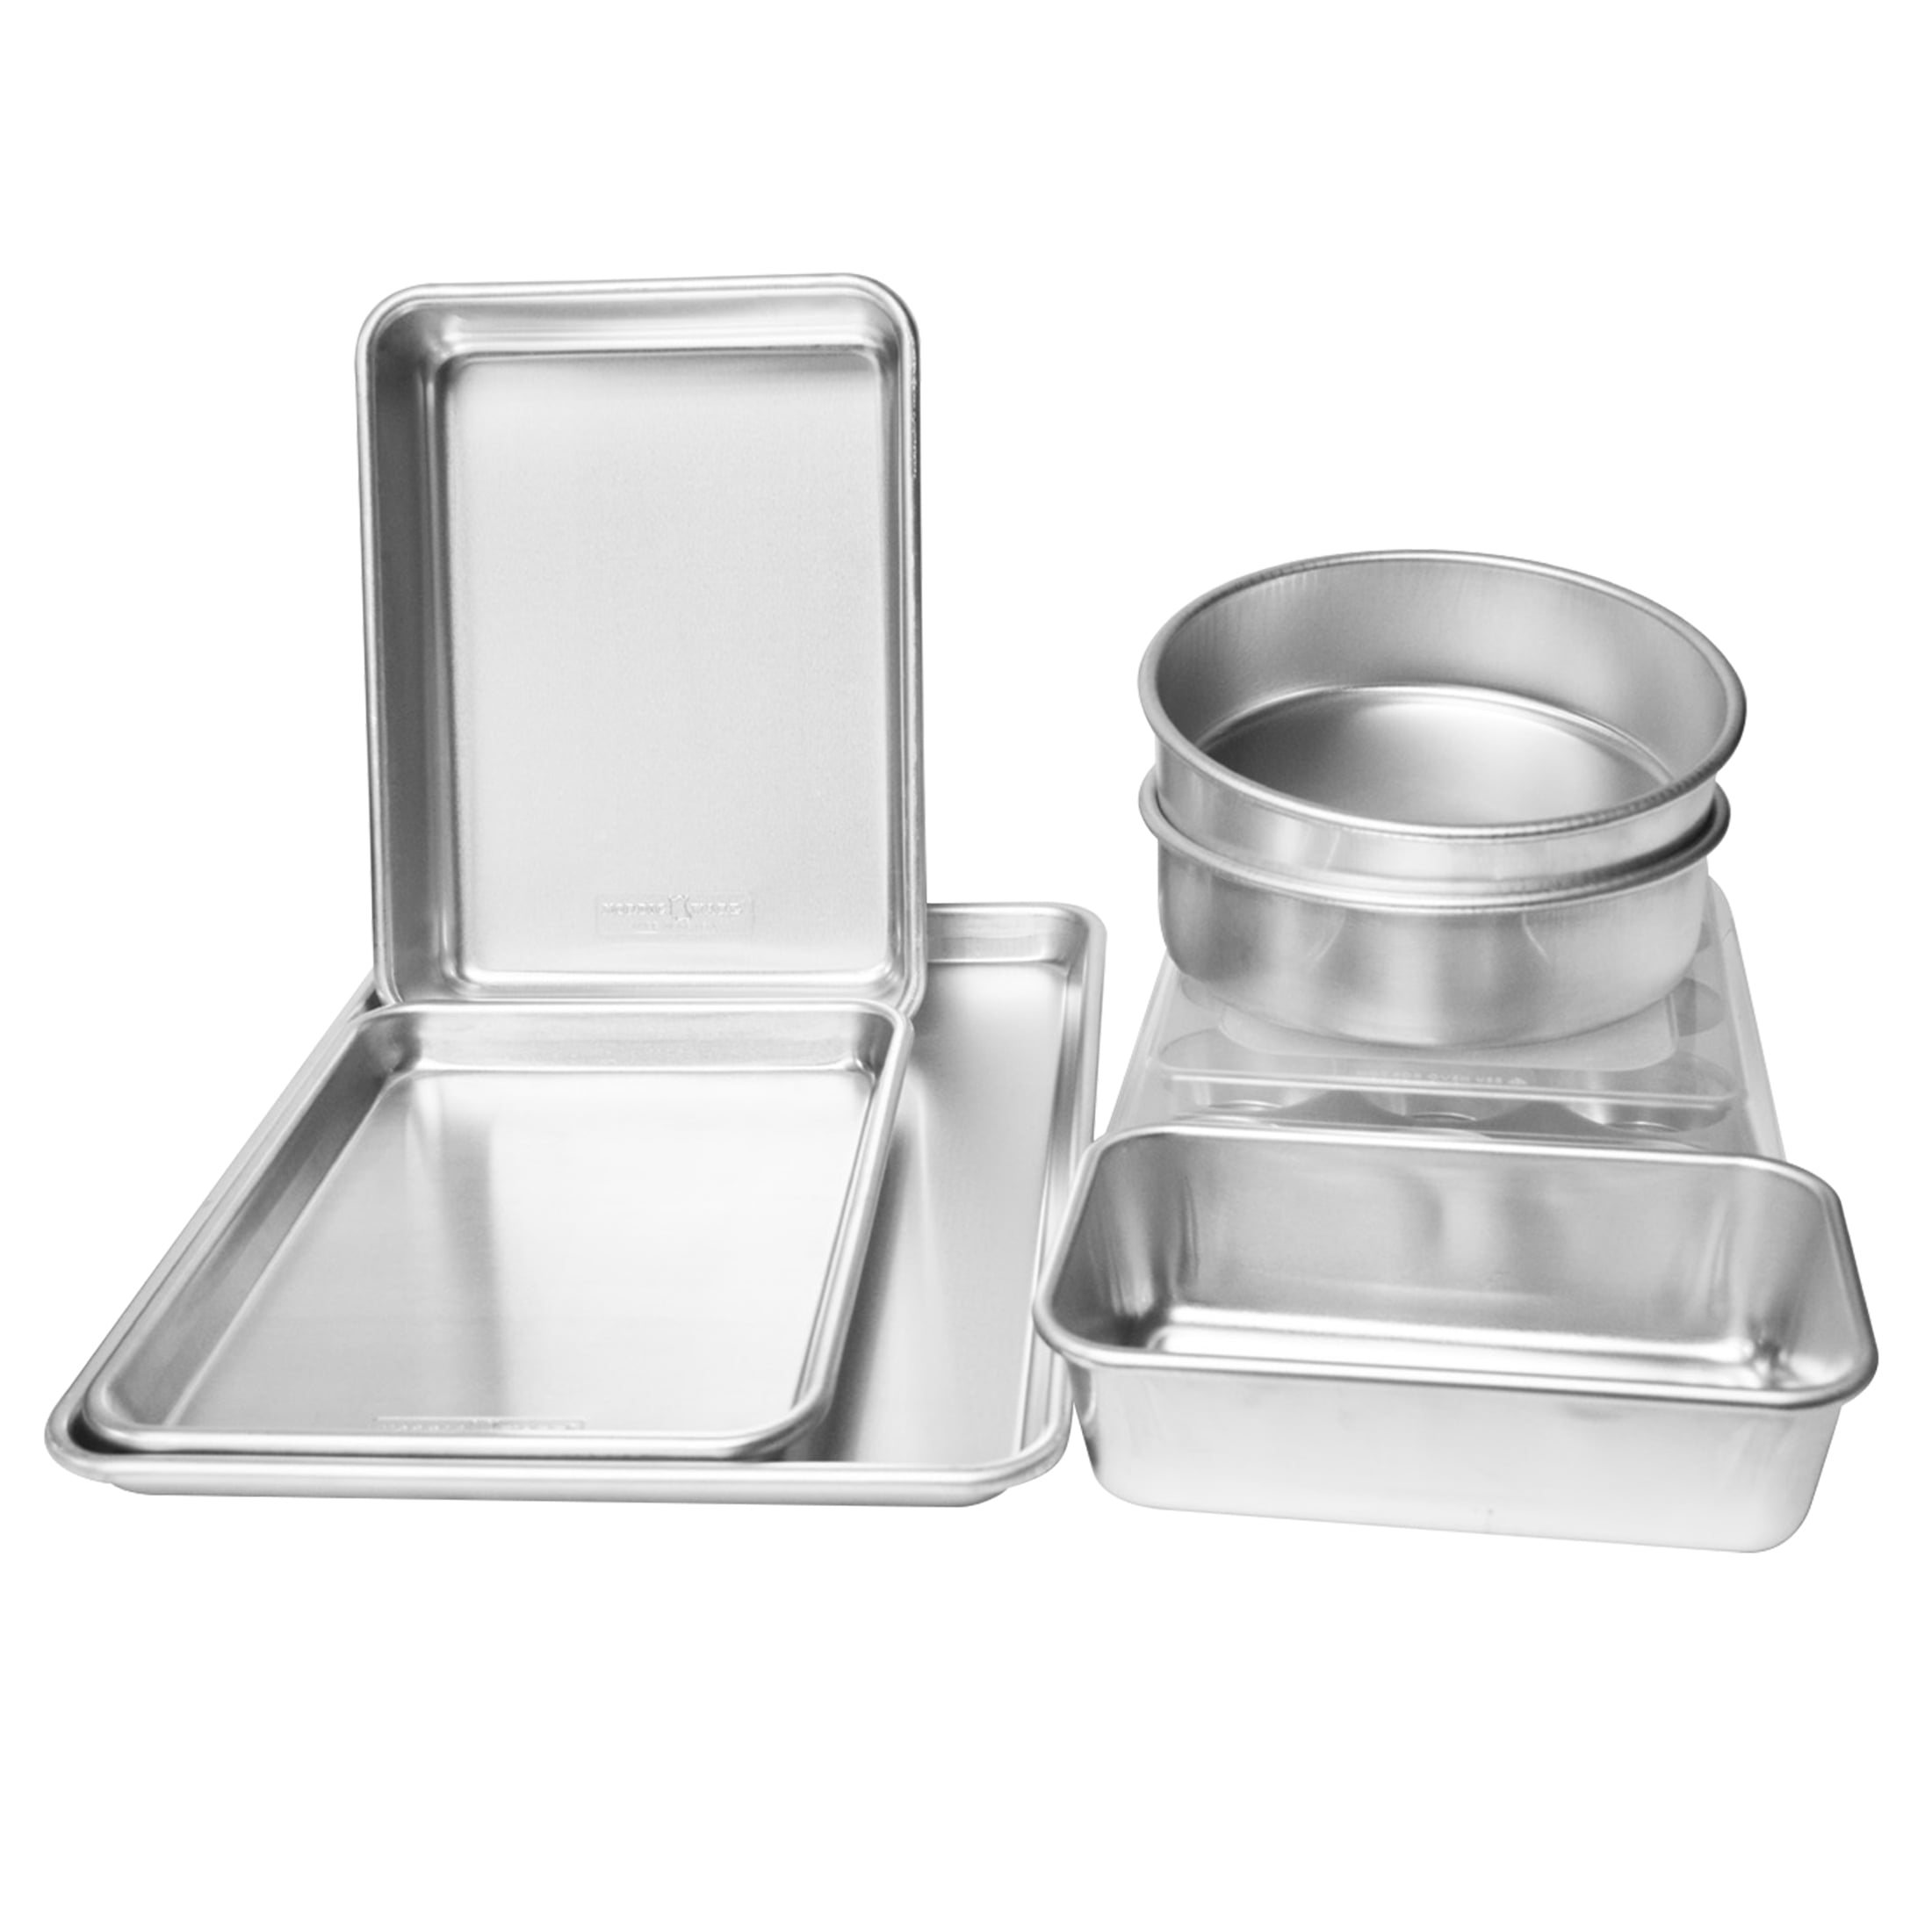 Nordic Ware Natural Bakeware Aluminum 2-Piece Angel Food Pan with Cooling Feet, Silver